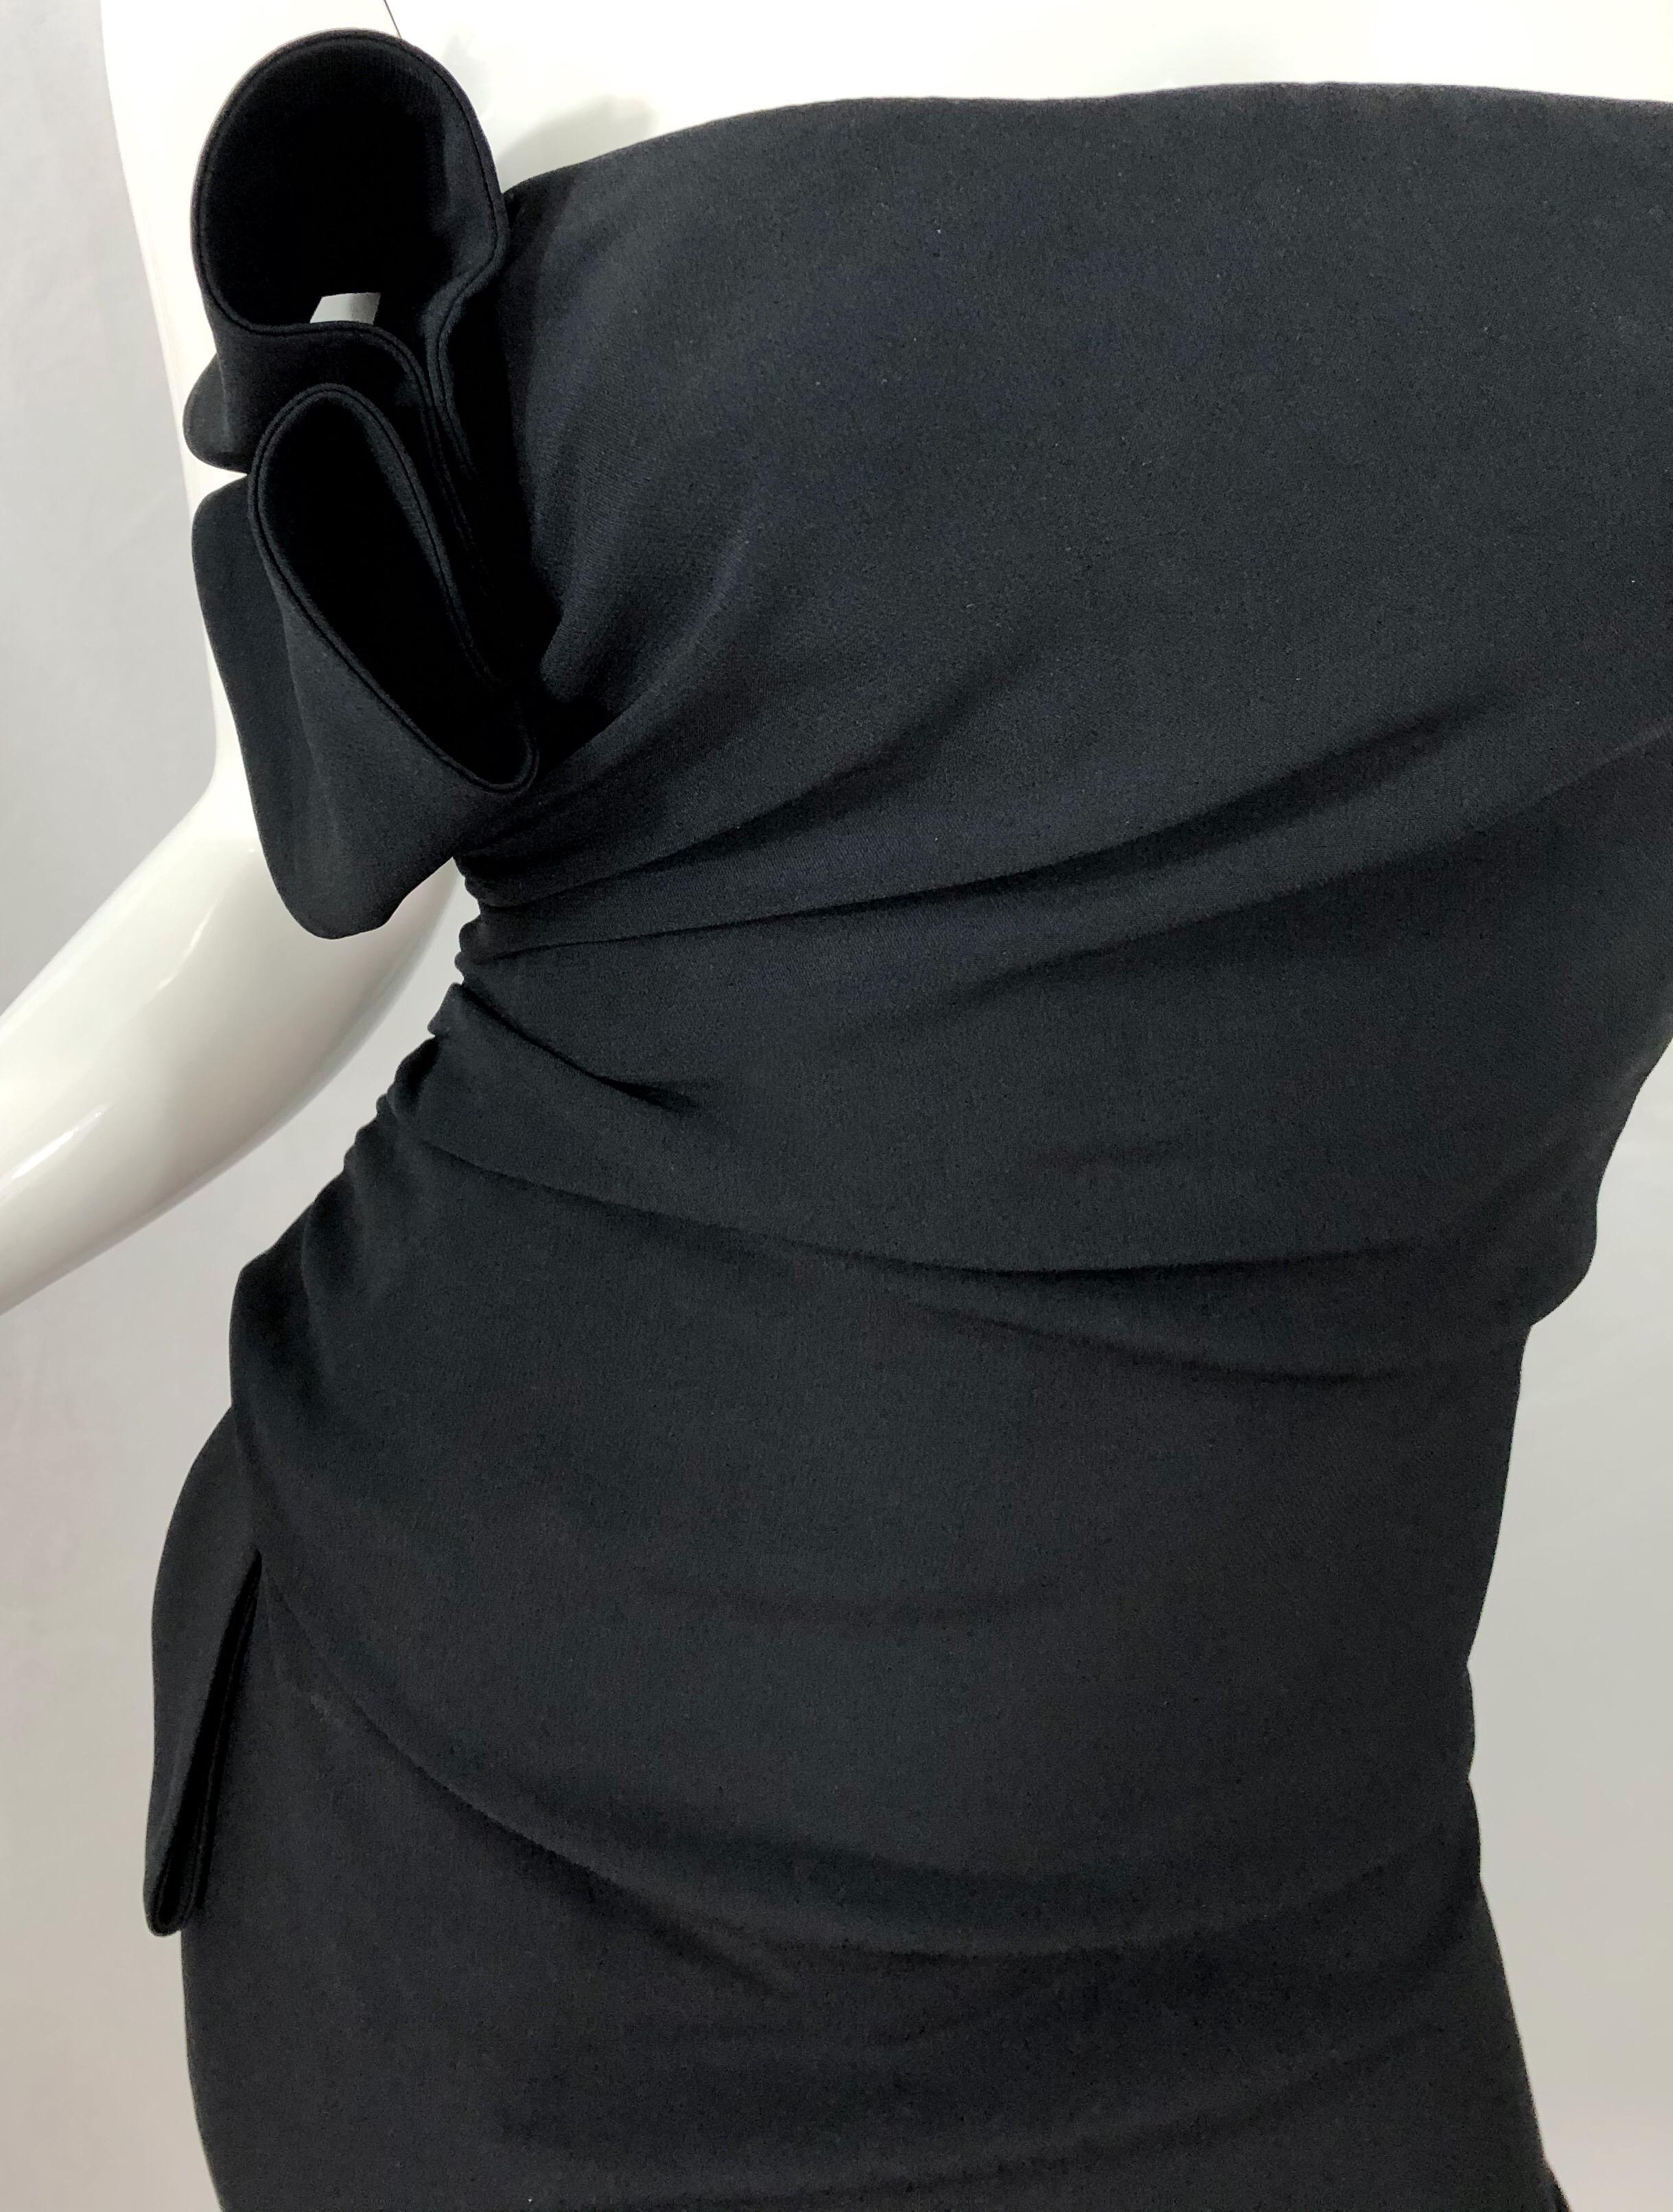 Valentino Early 2000s Size 8 Black Strapless Avant Garde Strapless Dress In Excellent Condition For Sale In San Diego, CA